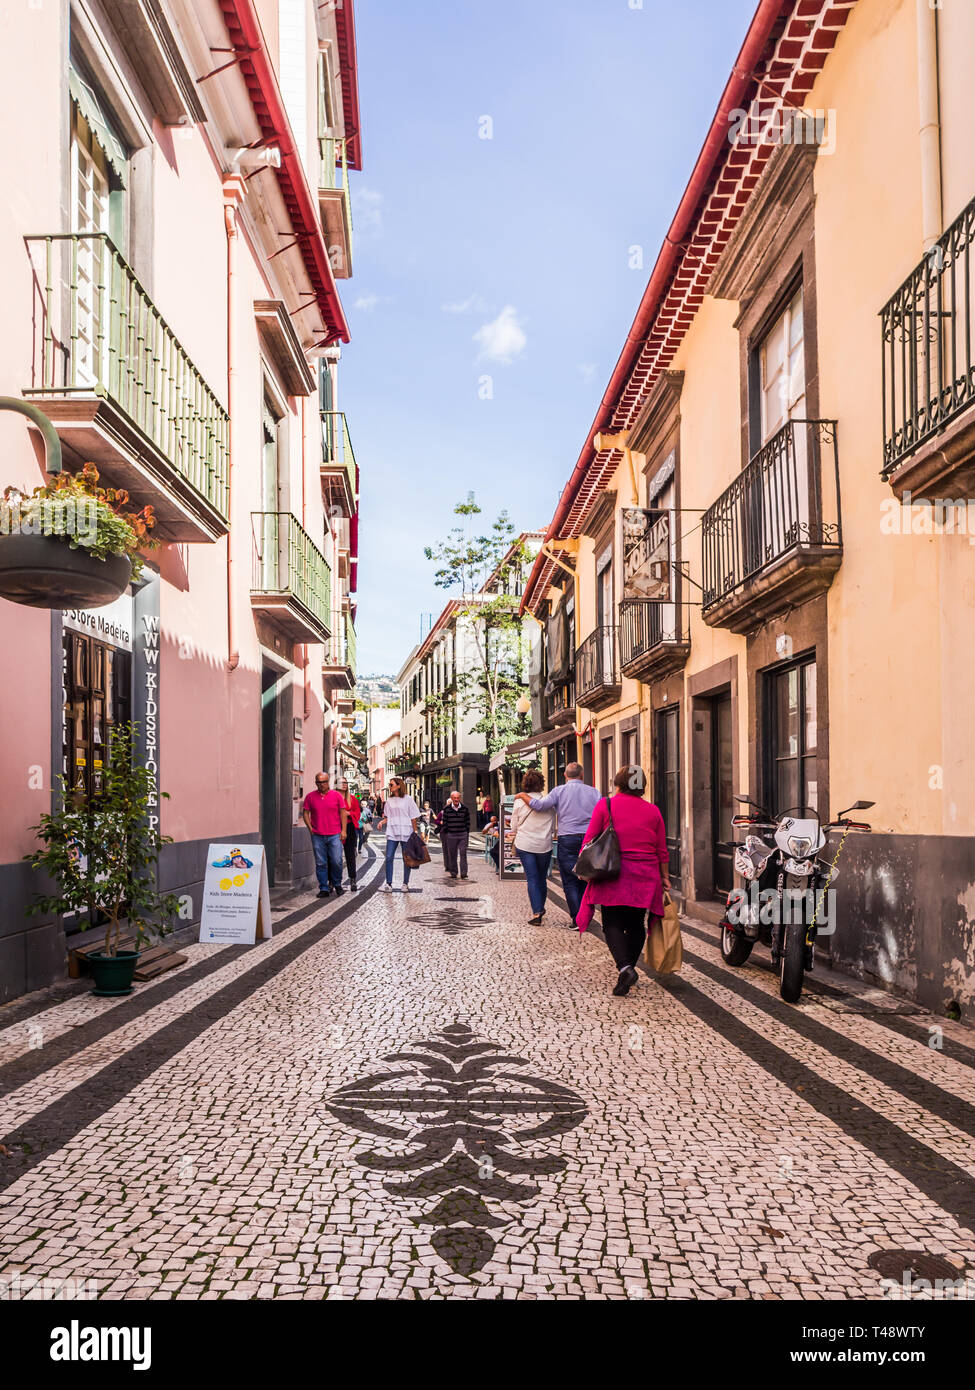 Madeira, Portugal - October 31, 2018: Street in the historical part of Funchal, the capital of Madeira, Portugal. Stock Photo